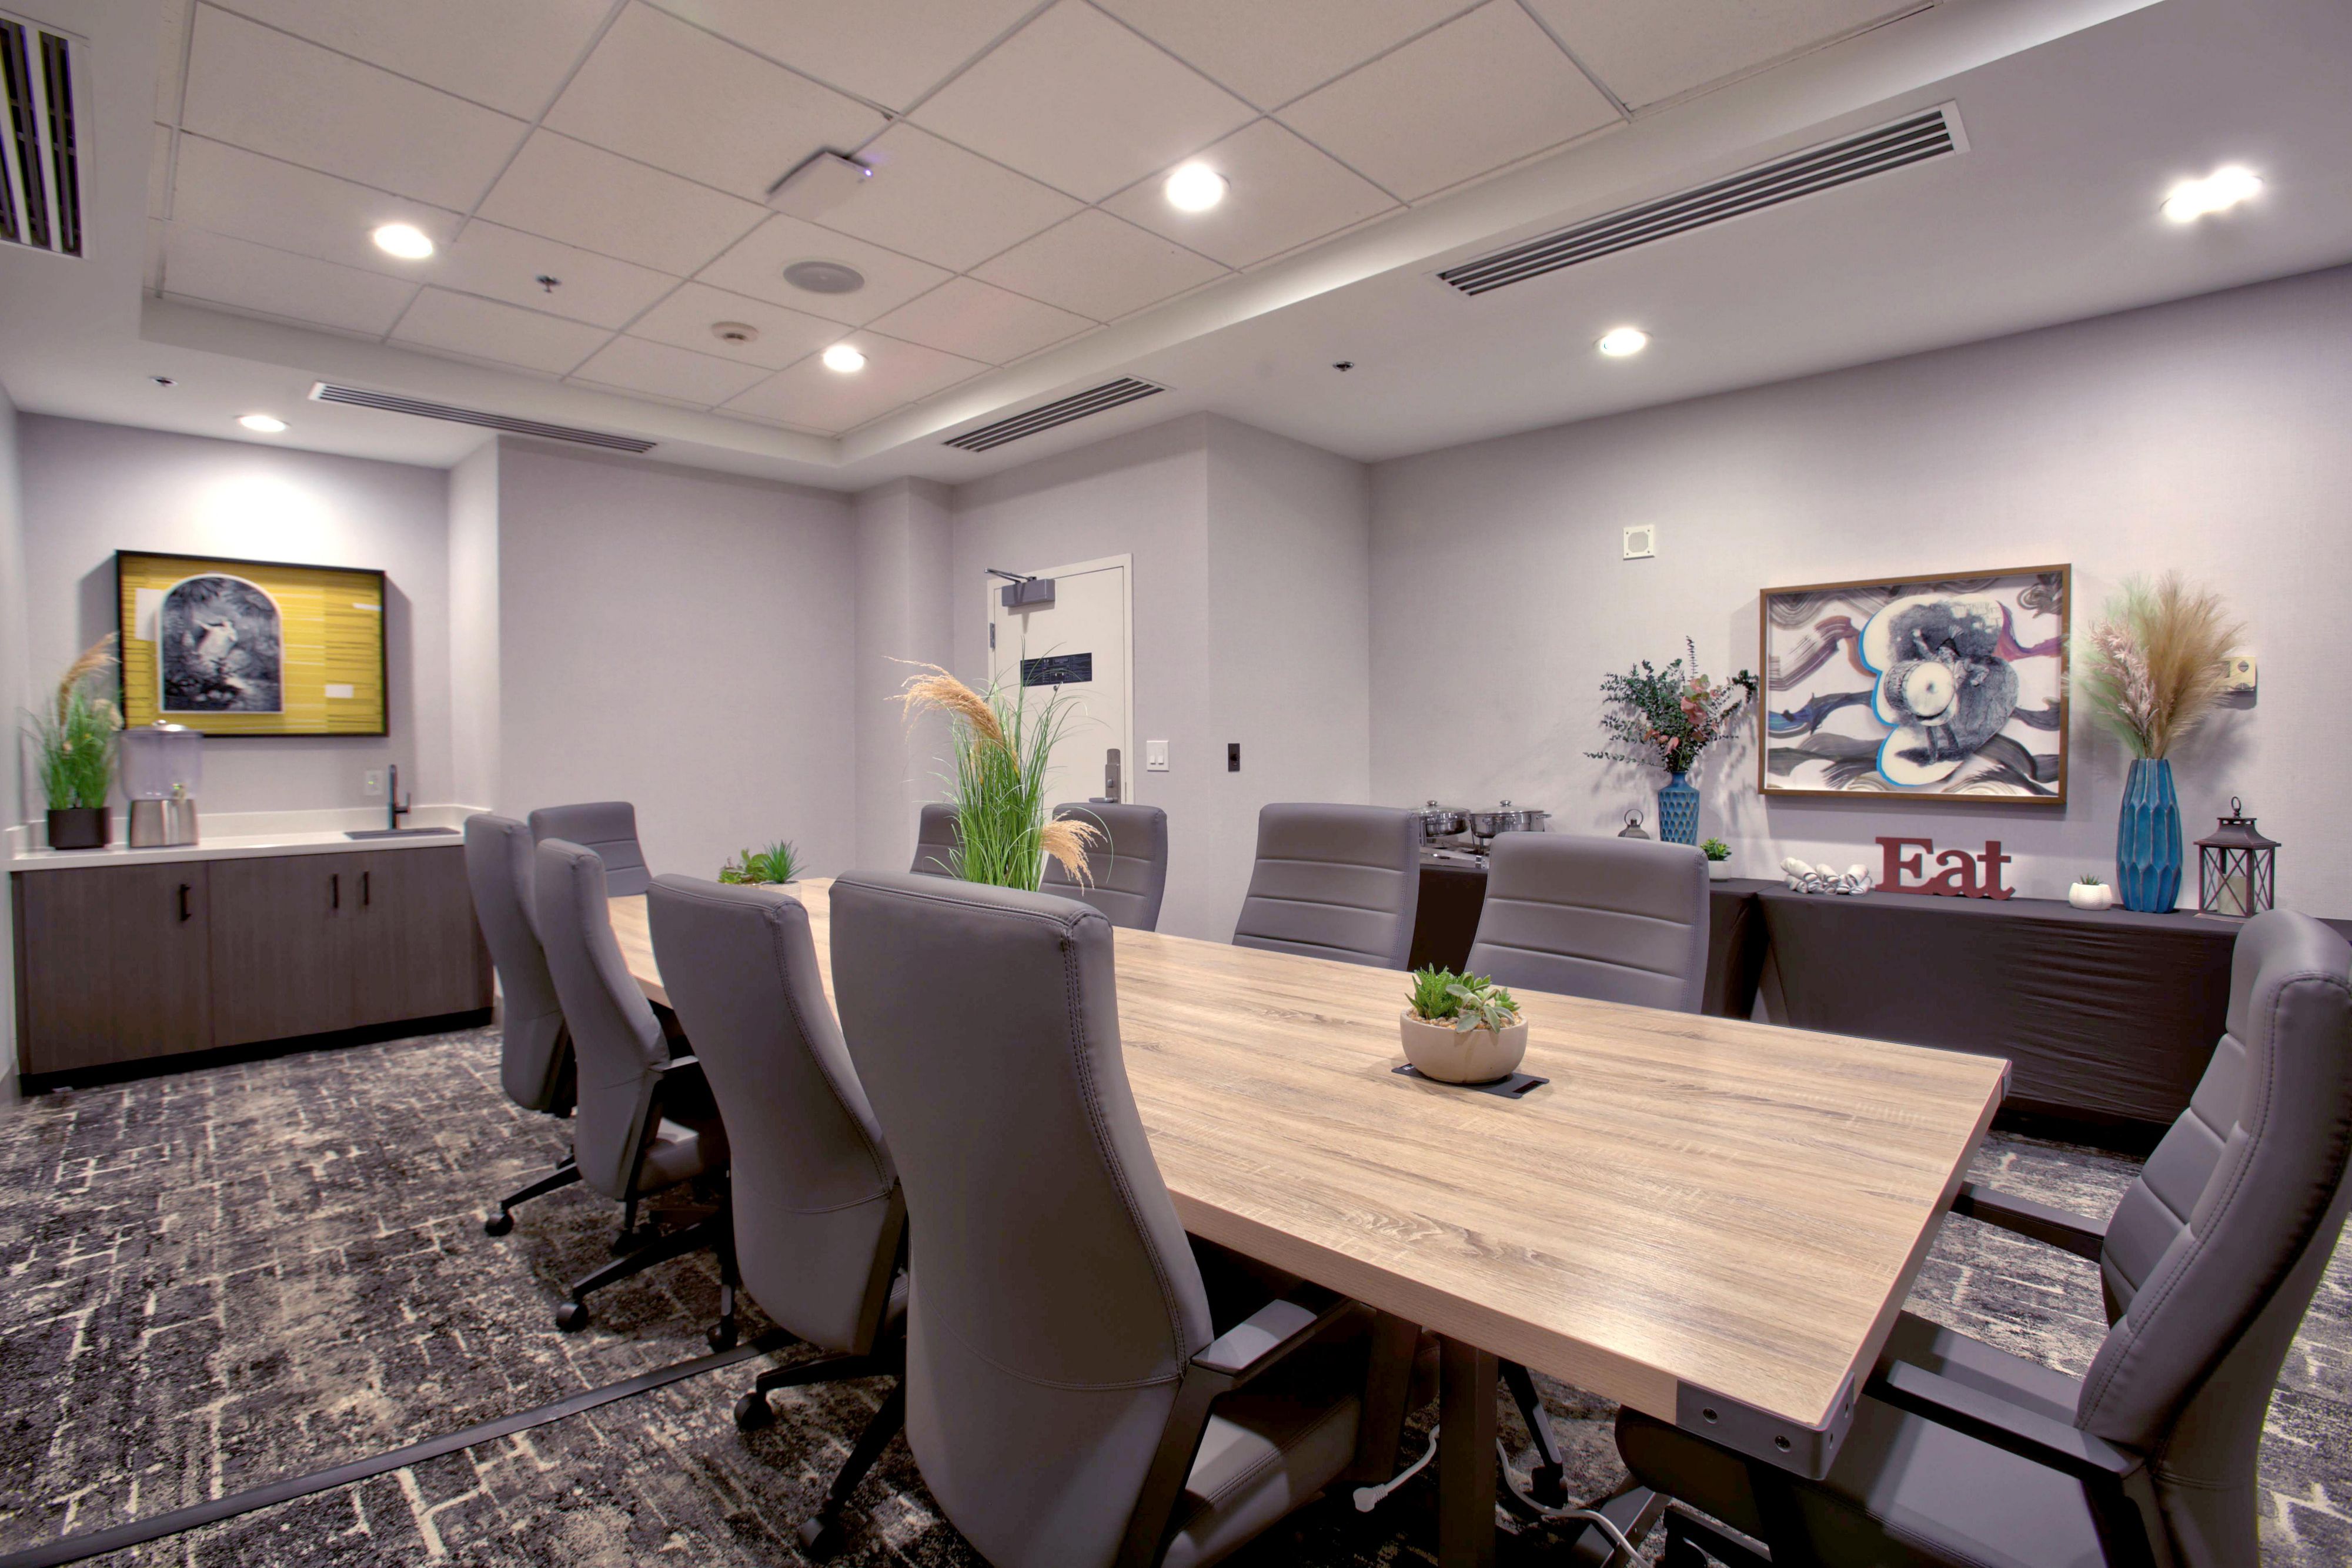 Discover a trendy and productive environment for your meetings and events at our French Quarter hotel. With four flexible meeting spaces, including a multi-purpose room with natural light, we host events of all sizes, from large trainings to private dinners and intimate boardroom sessions. Catering is available through Common Interest restaurant. 